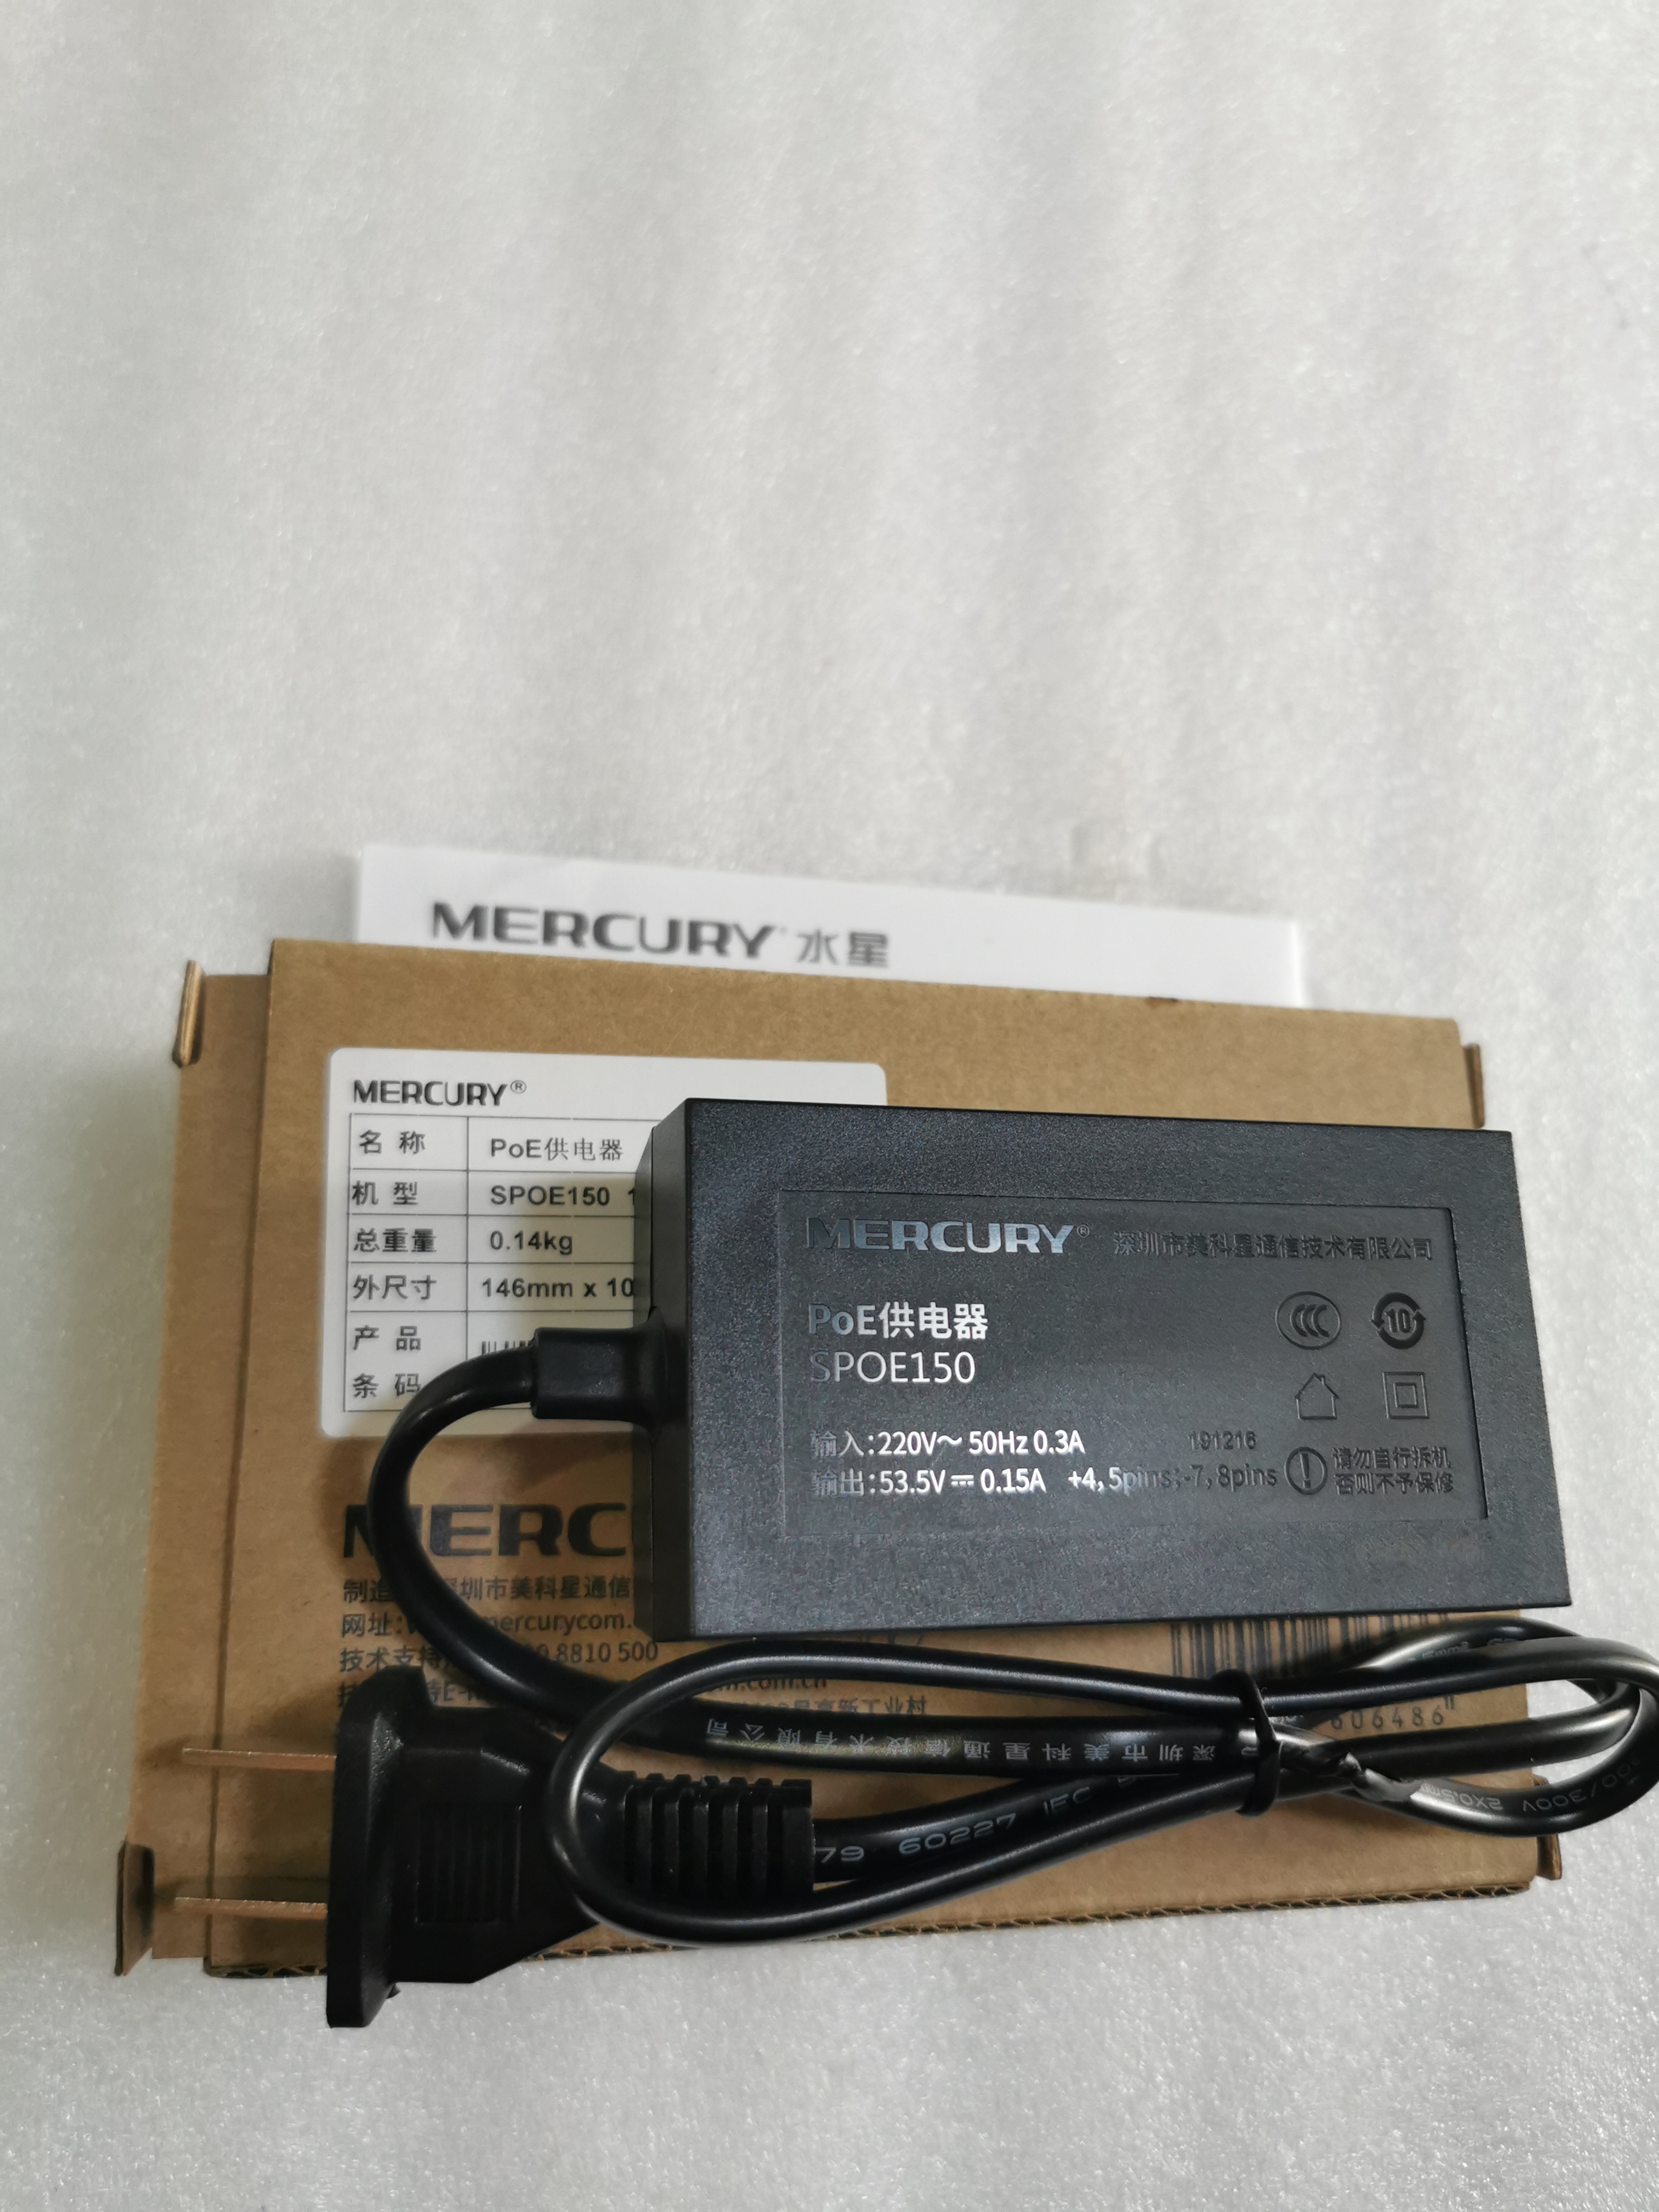 *Brand NEW*TP-LINK 53.5V 0.15A T535015-2-POE AC DC ADAPTER POWER SUPPLY